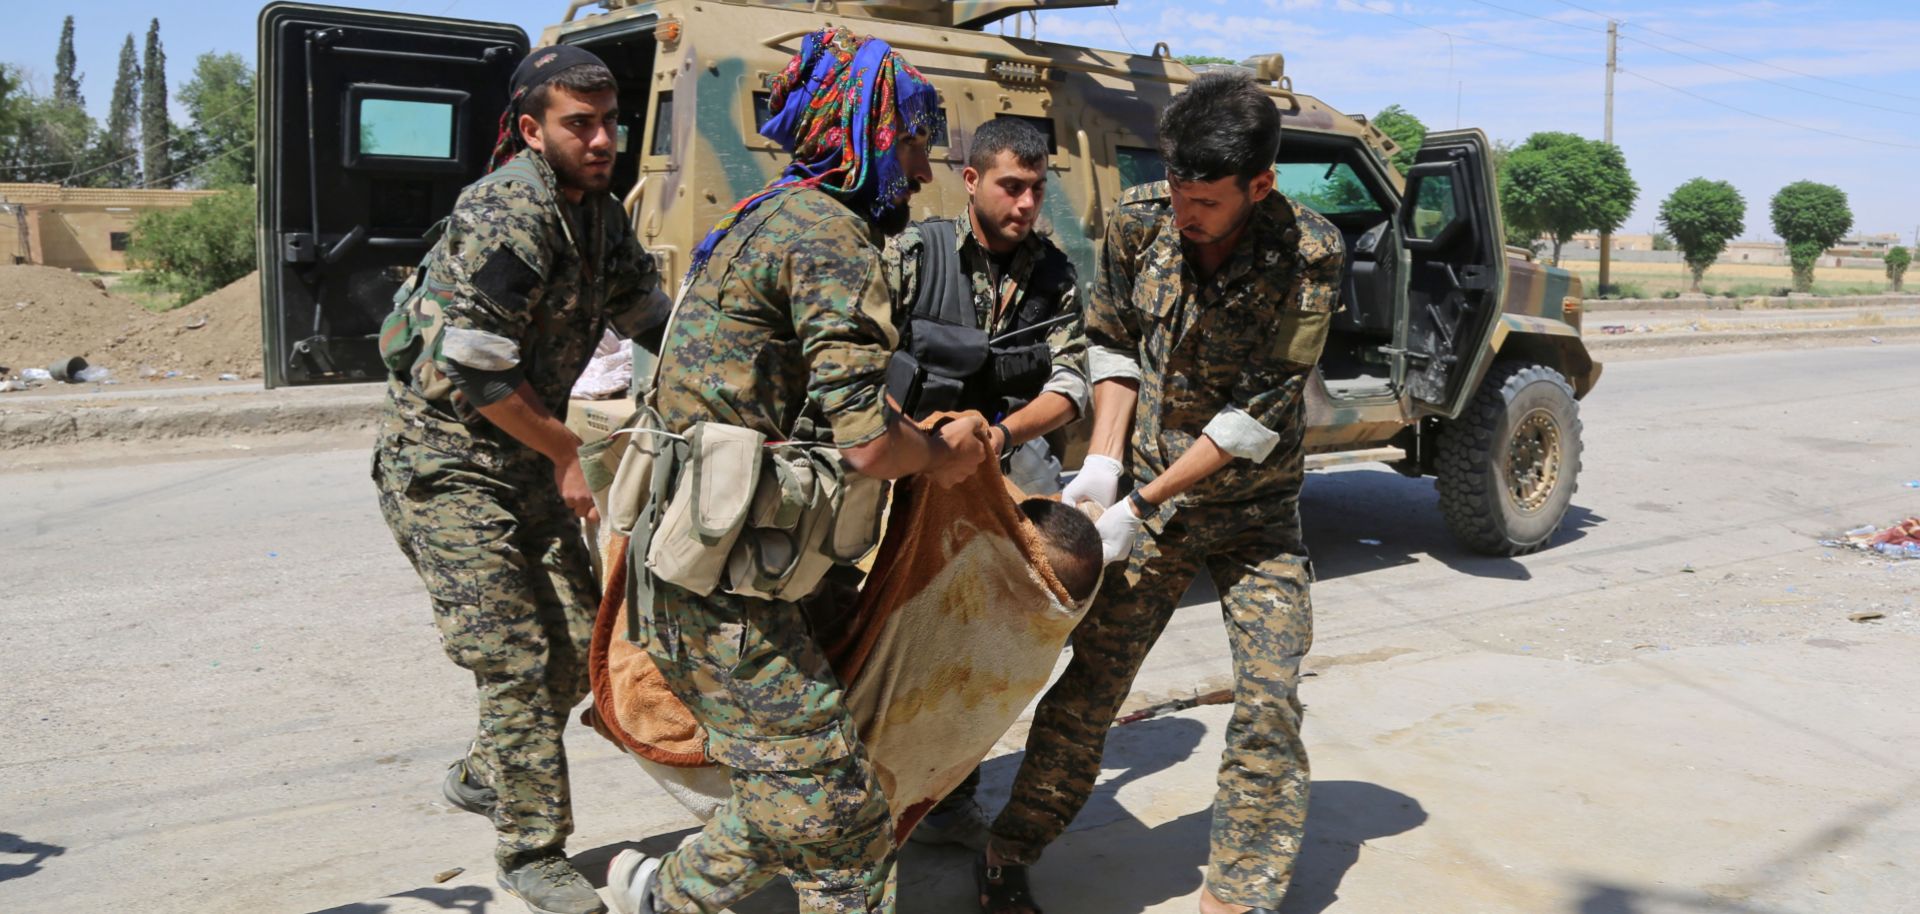 Members of the U.S.-backed Kurdish People's Protection Units carry a wounded Kurdish fighter to a field hospital near the northern Syrian village of Raqqa Samra on June 21, 2017.